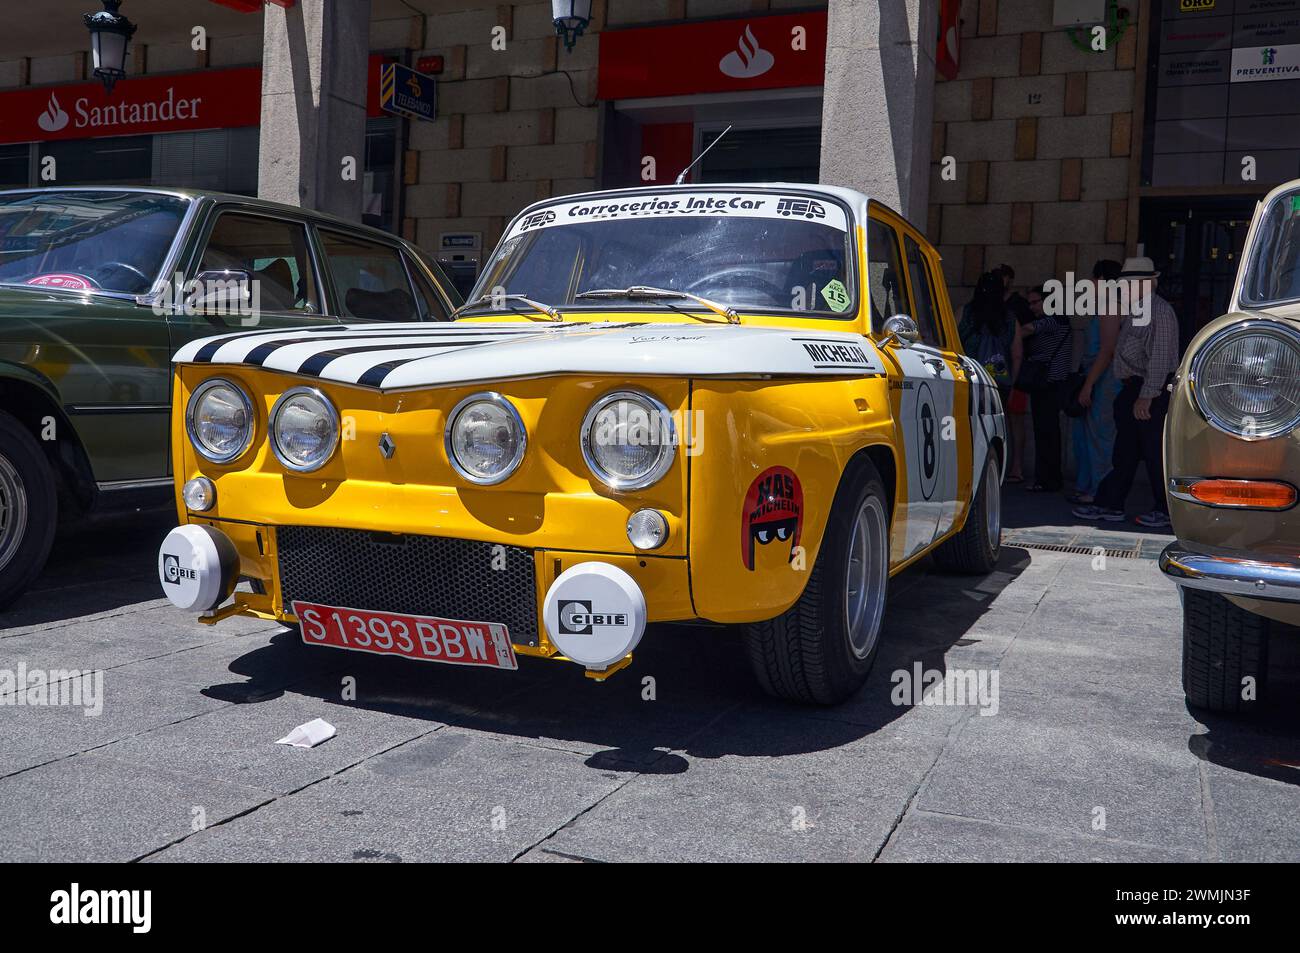 16-06-2013 Segovia, Spain - A classic Renault rally car steals the spotlight at an antique car gathering Stock Photo